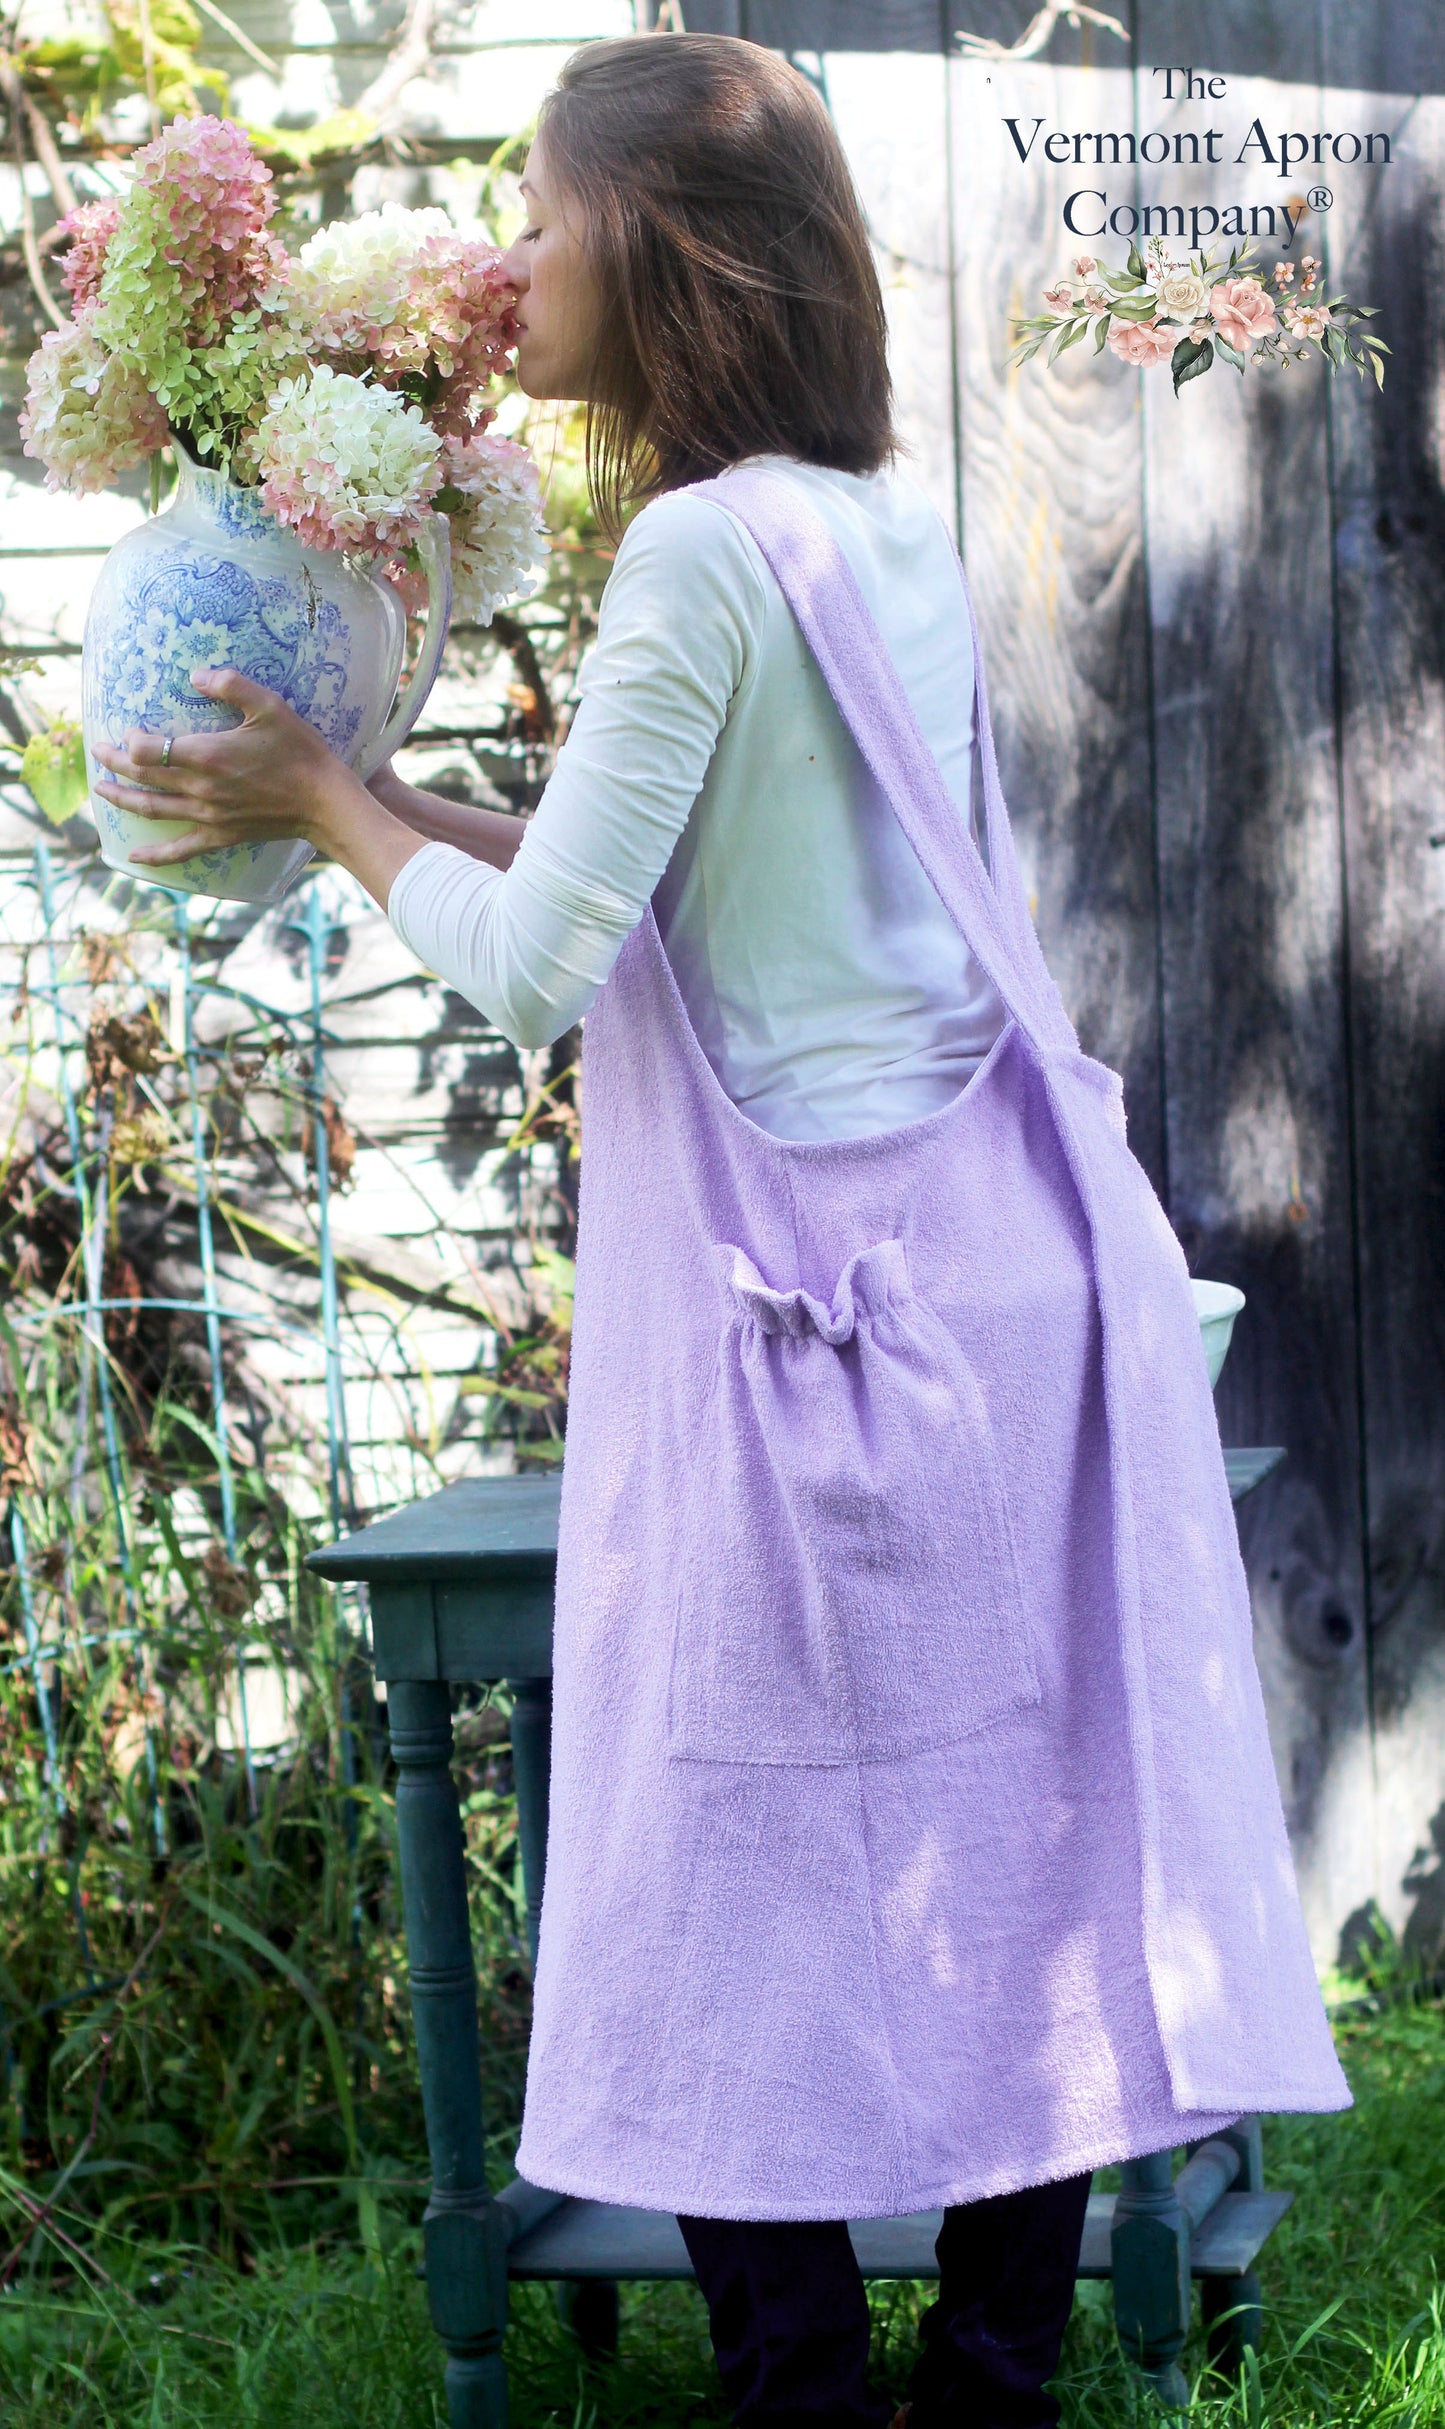 XS-5X Lilac Terry Apron - No Tie Crossback Apron - The Model is smelling the flowers.